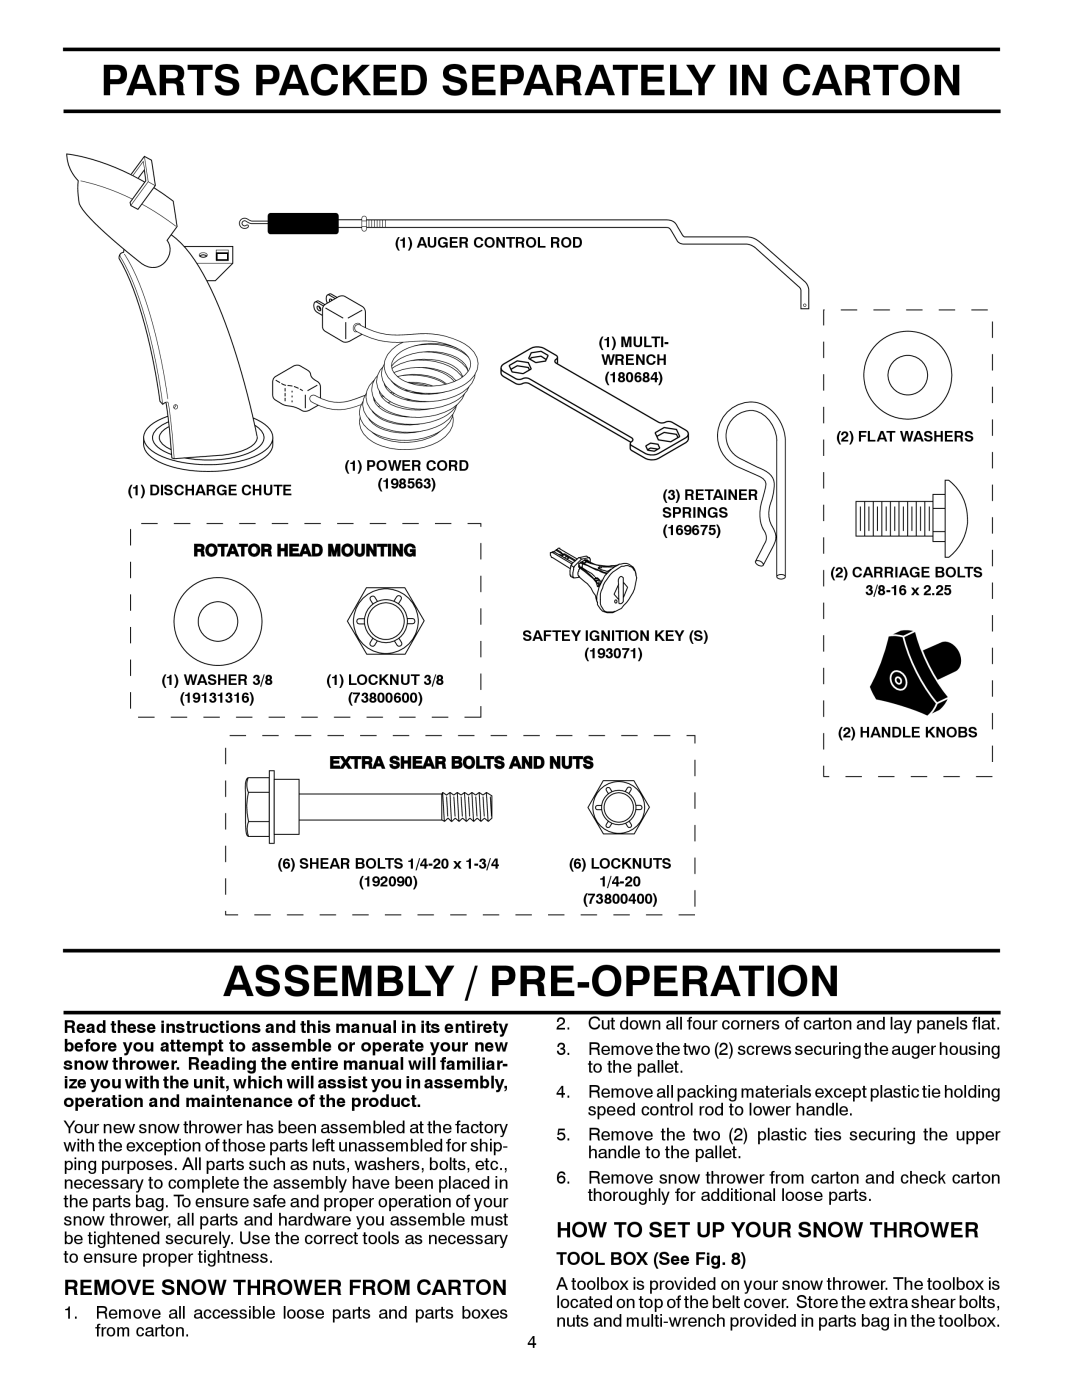 Husqvarna 11527SB manual Parts Packed Separately In Carton, Assembly / Pre-Operation, Remove Snow Thrower From Carton 